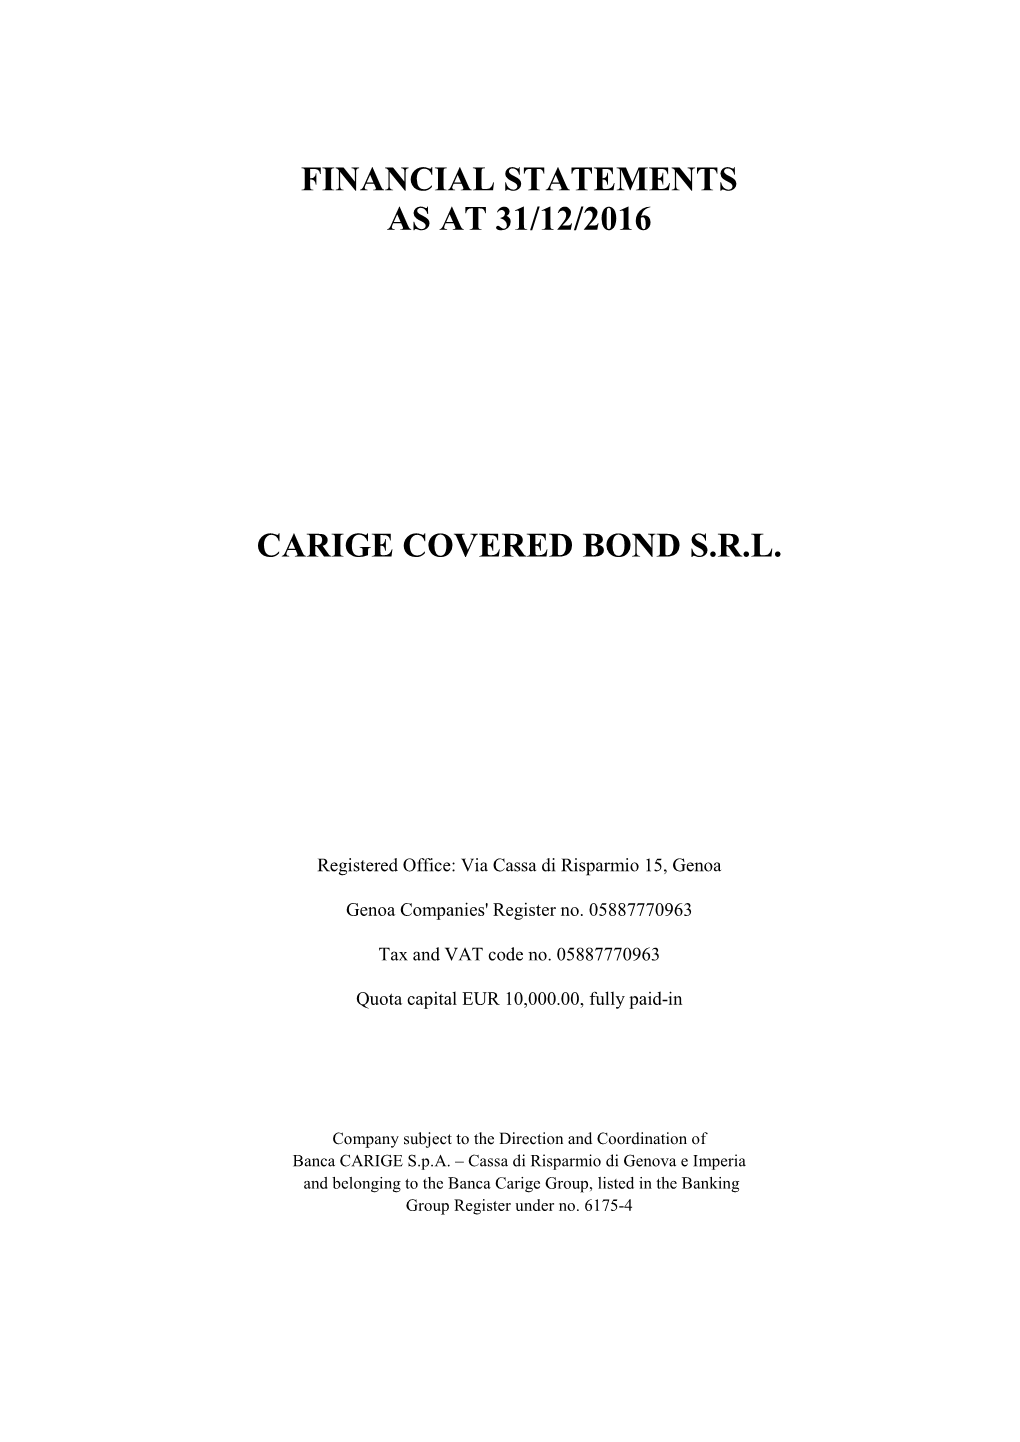 Financial Statements As at 31/12/2016 Carige Covered